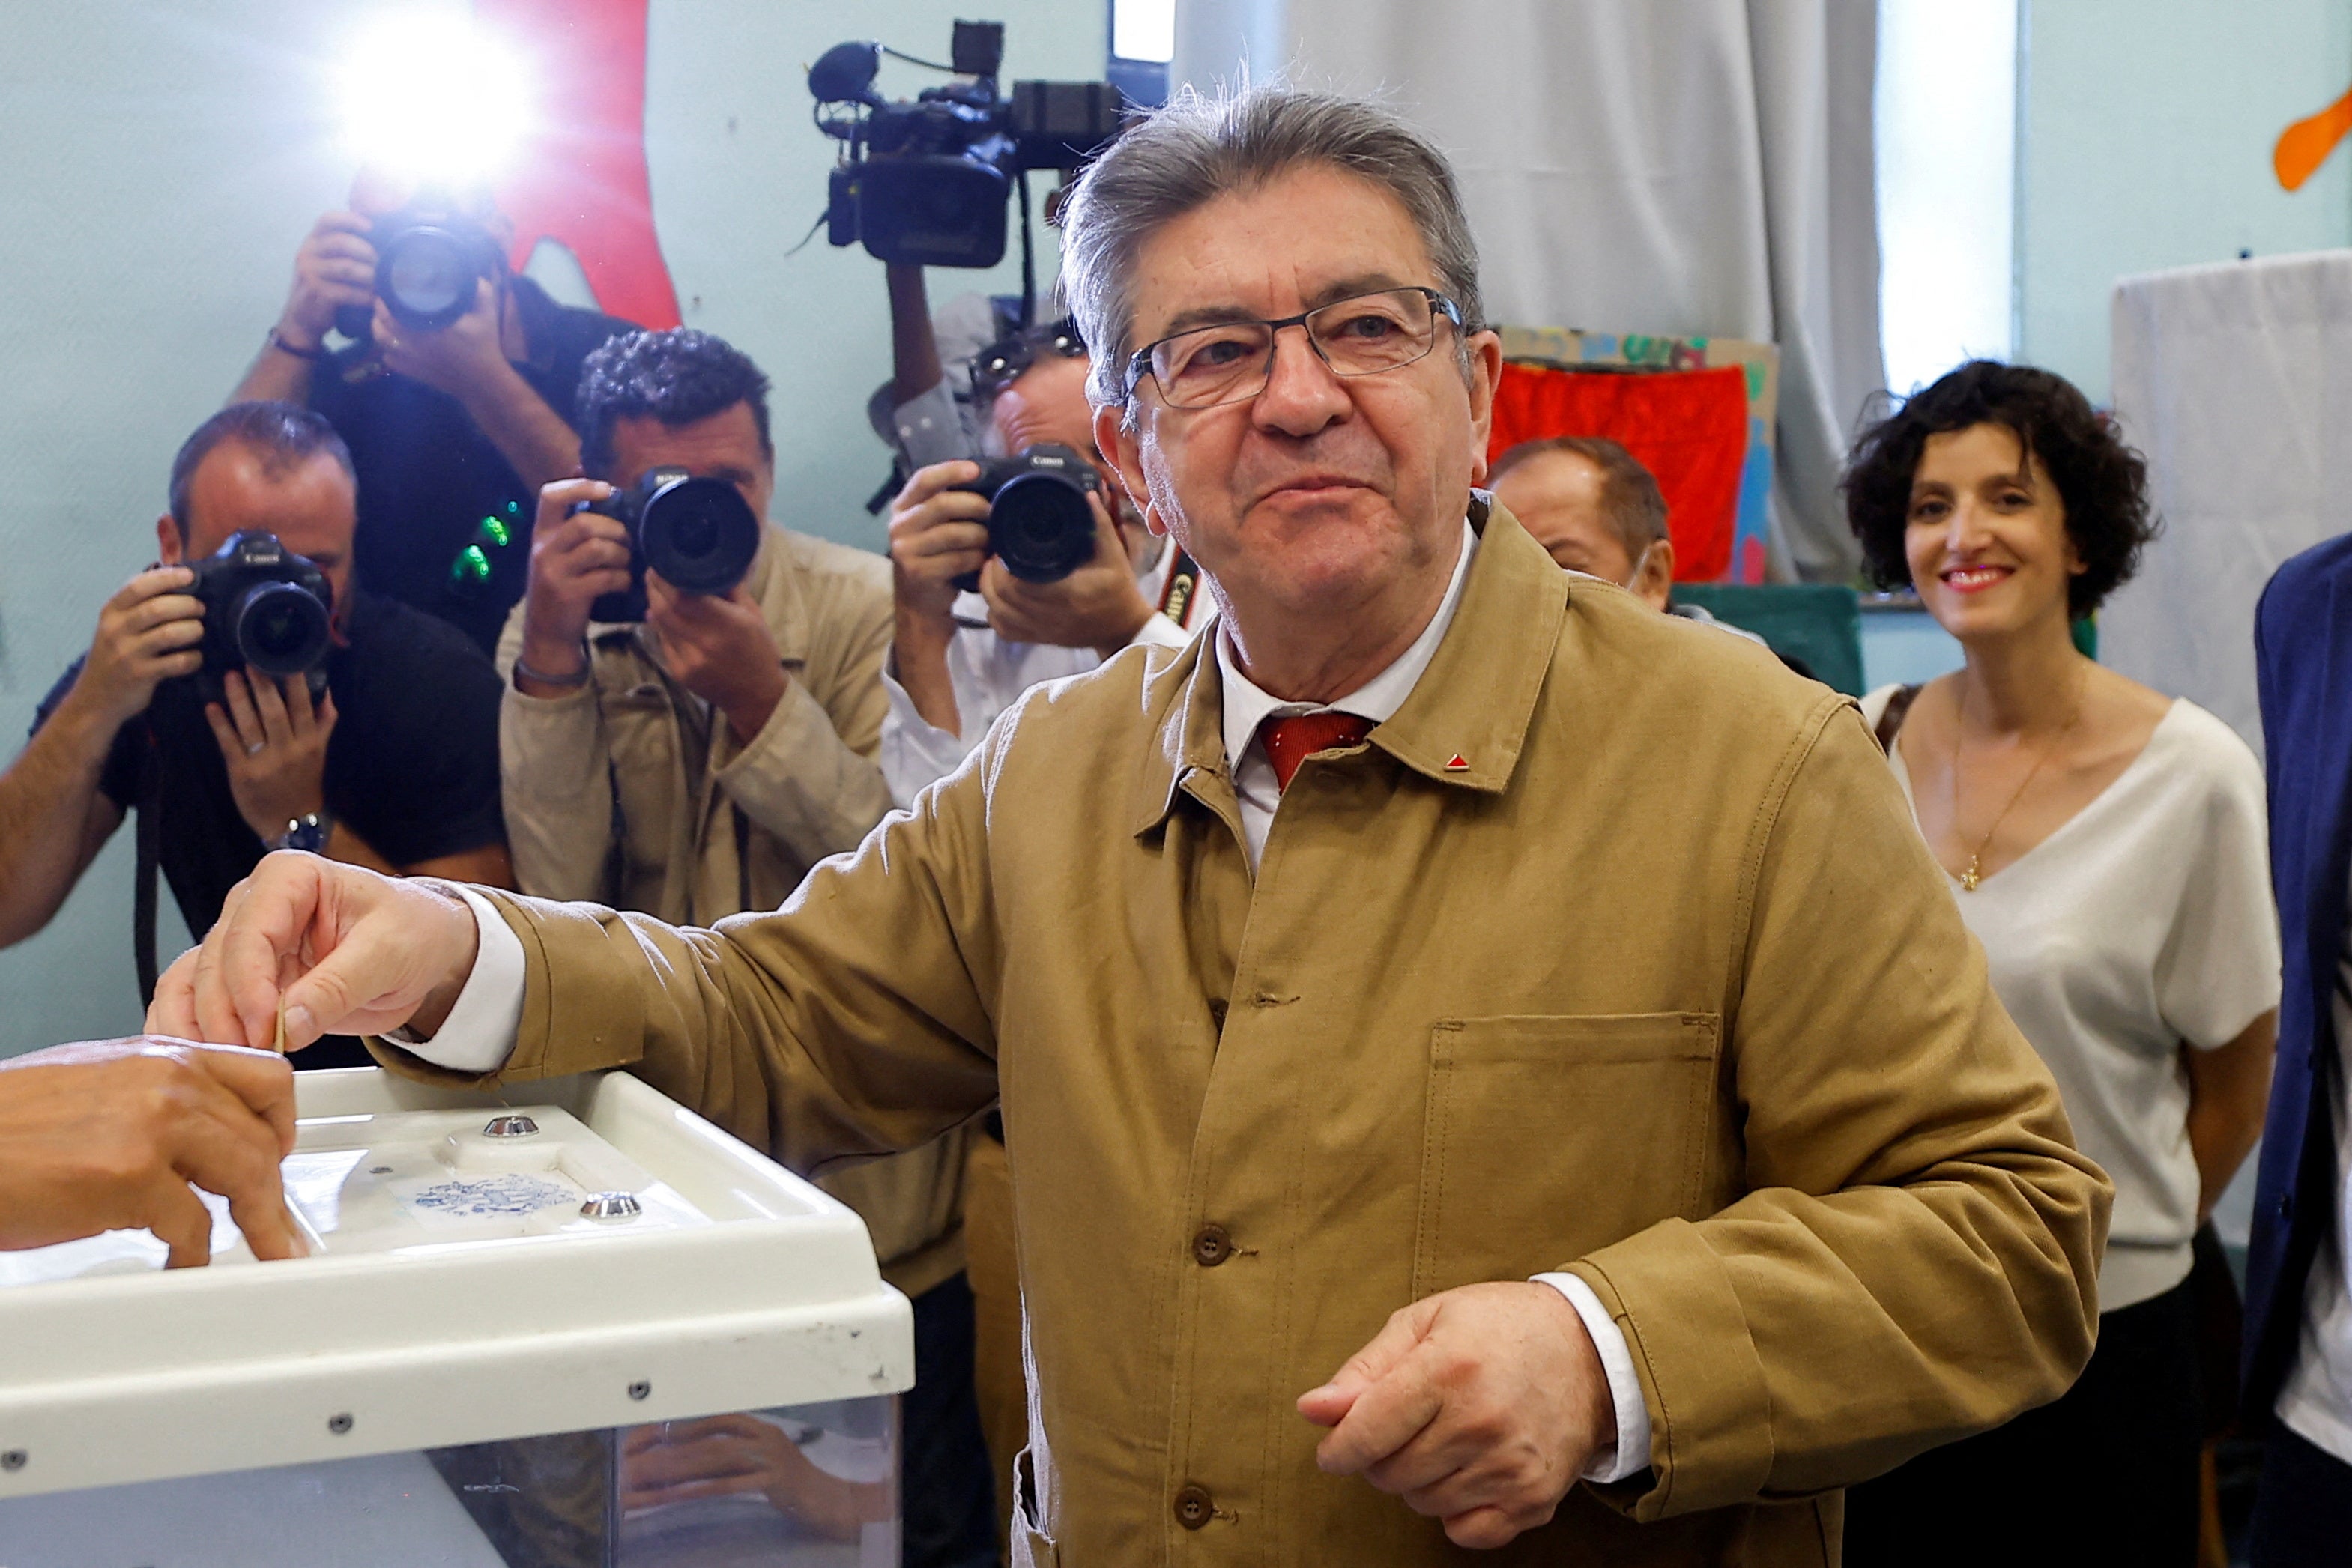 Jean-Luc Melenchon casts his vote in the first round of the parliamentary elections at a polling station in Marseille on Friday 12 June